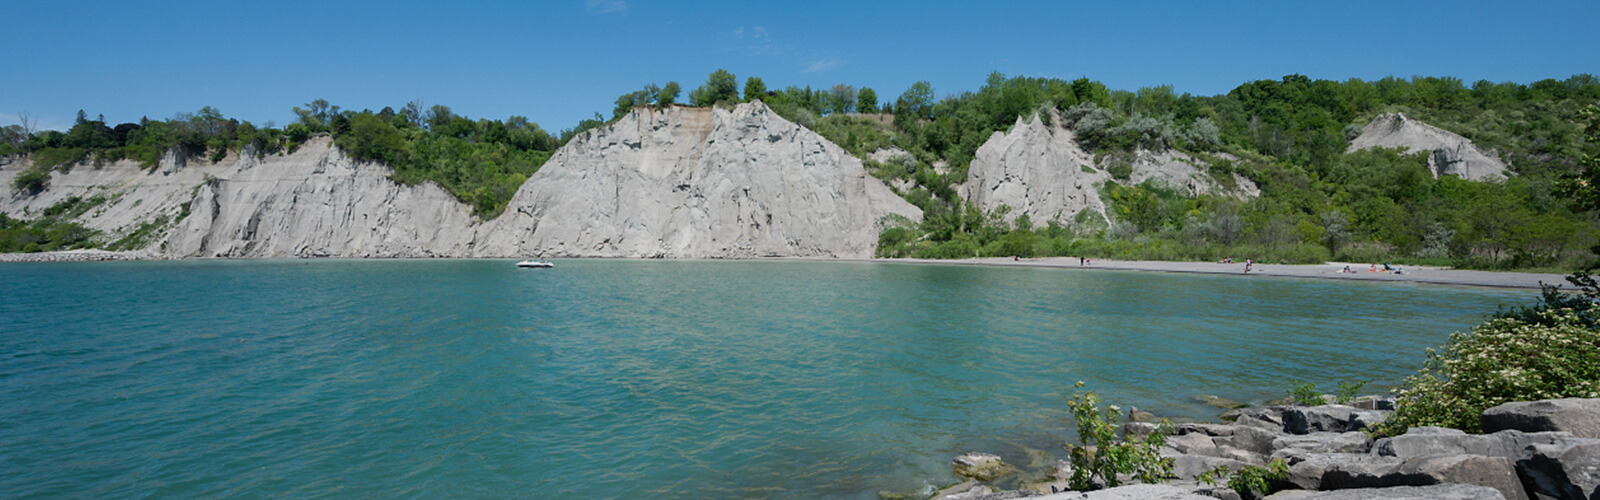 Bright blue water with the Scarborough Bluffs in the background